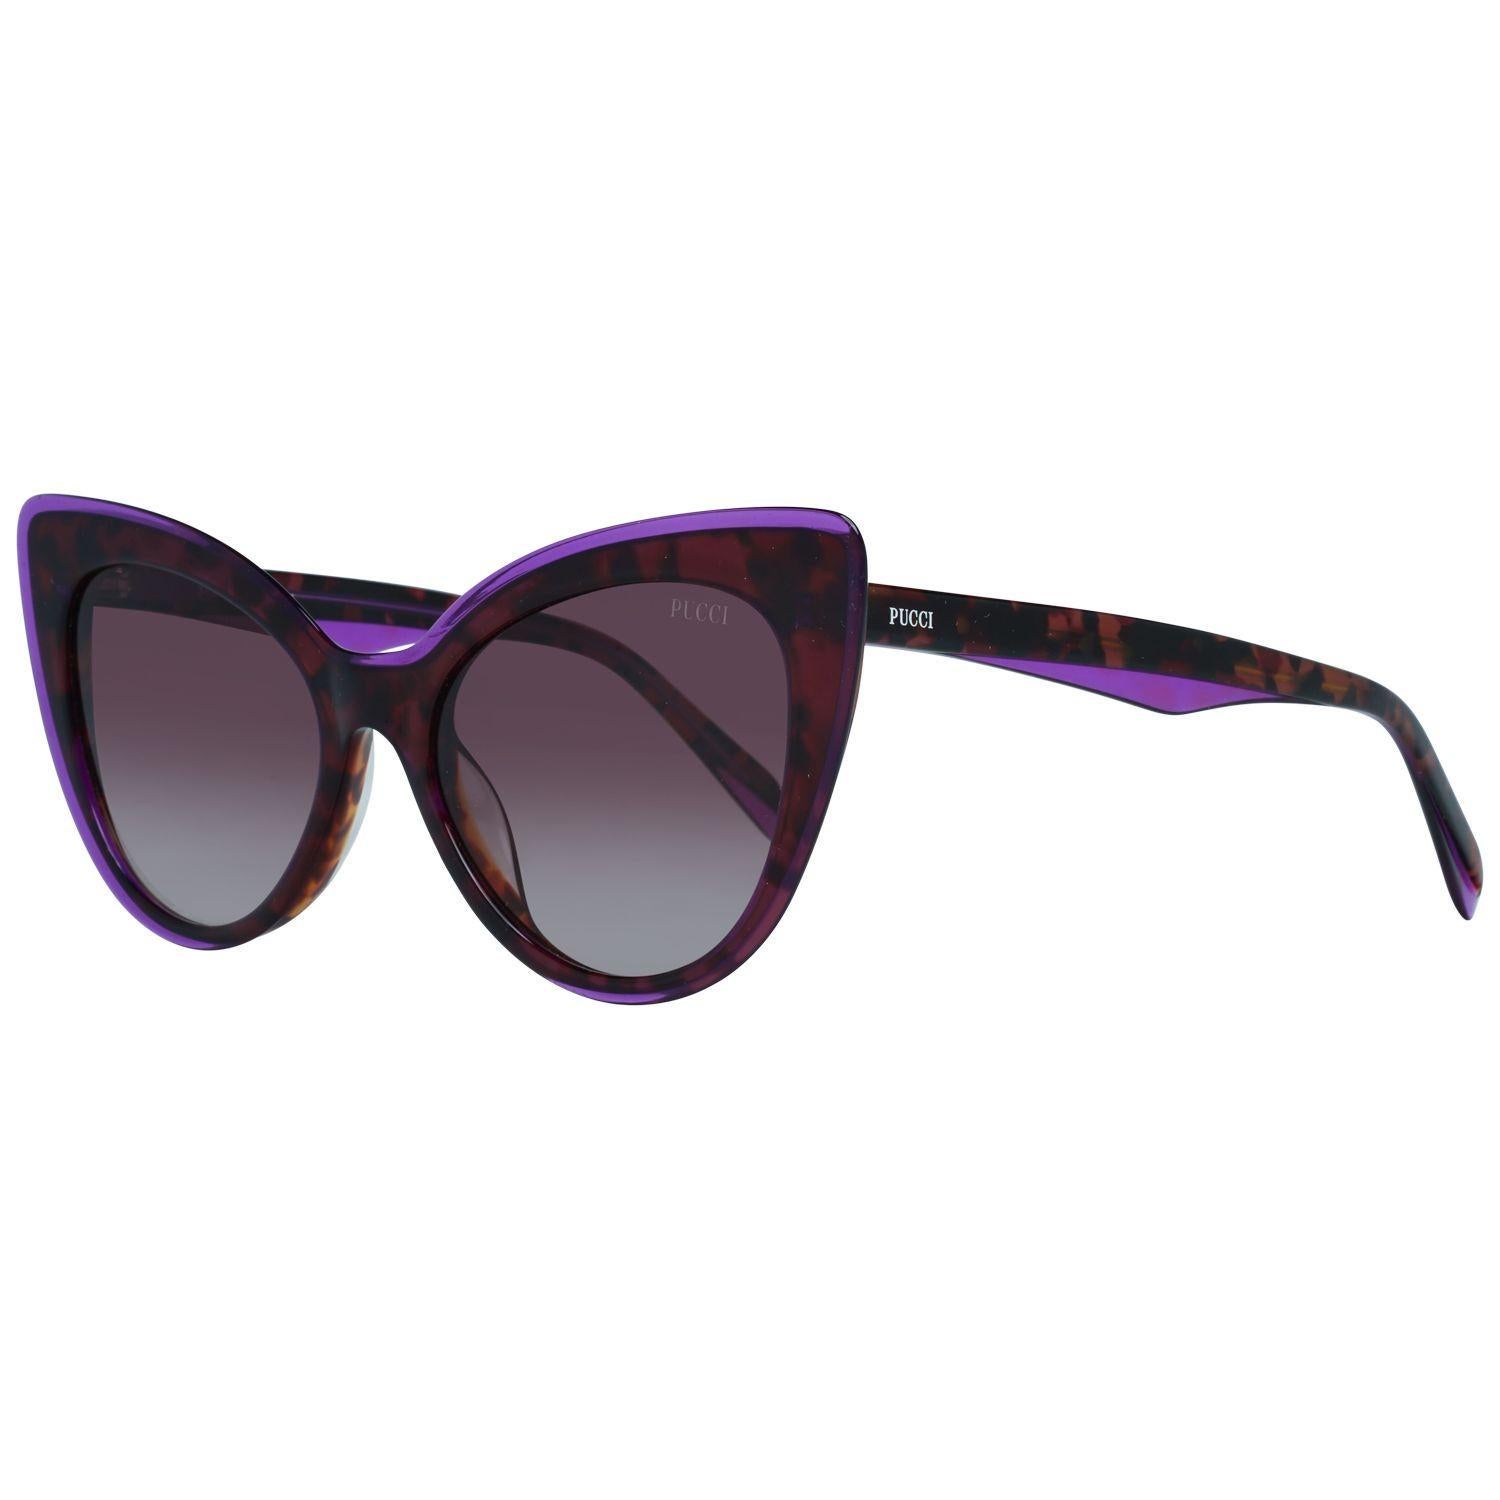 Emilio Pucci Brown and purple Cat Eye Sunglasses, Mod. EP0106. Gradient brown lenses. 'Pucci' signature on temples. Imported Details MATERIAL: Acetate COLOR: Brown MODEL: EP0106 5483F GENDER: Women COUNTRY OF MANUFACTURE: China ORIGINAL CASE?: Yes